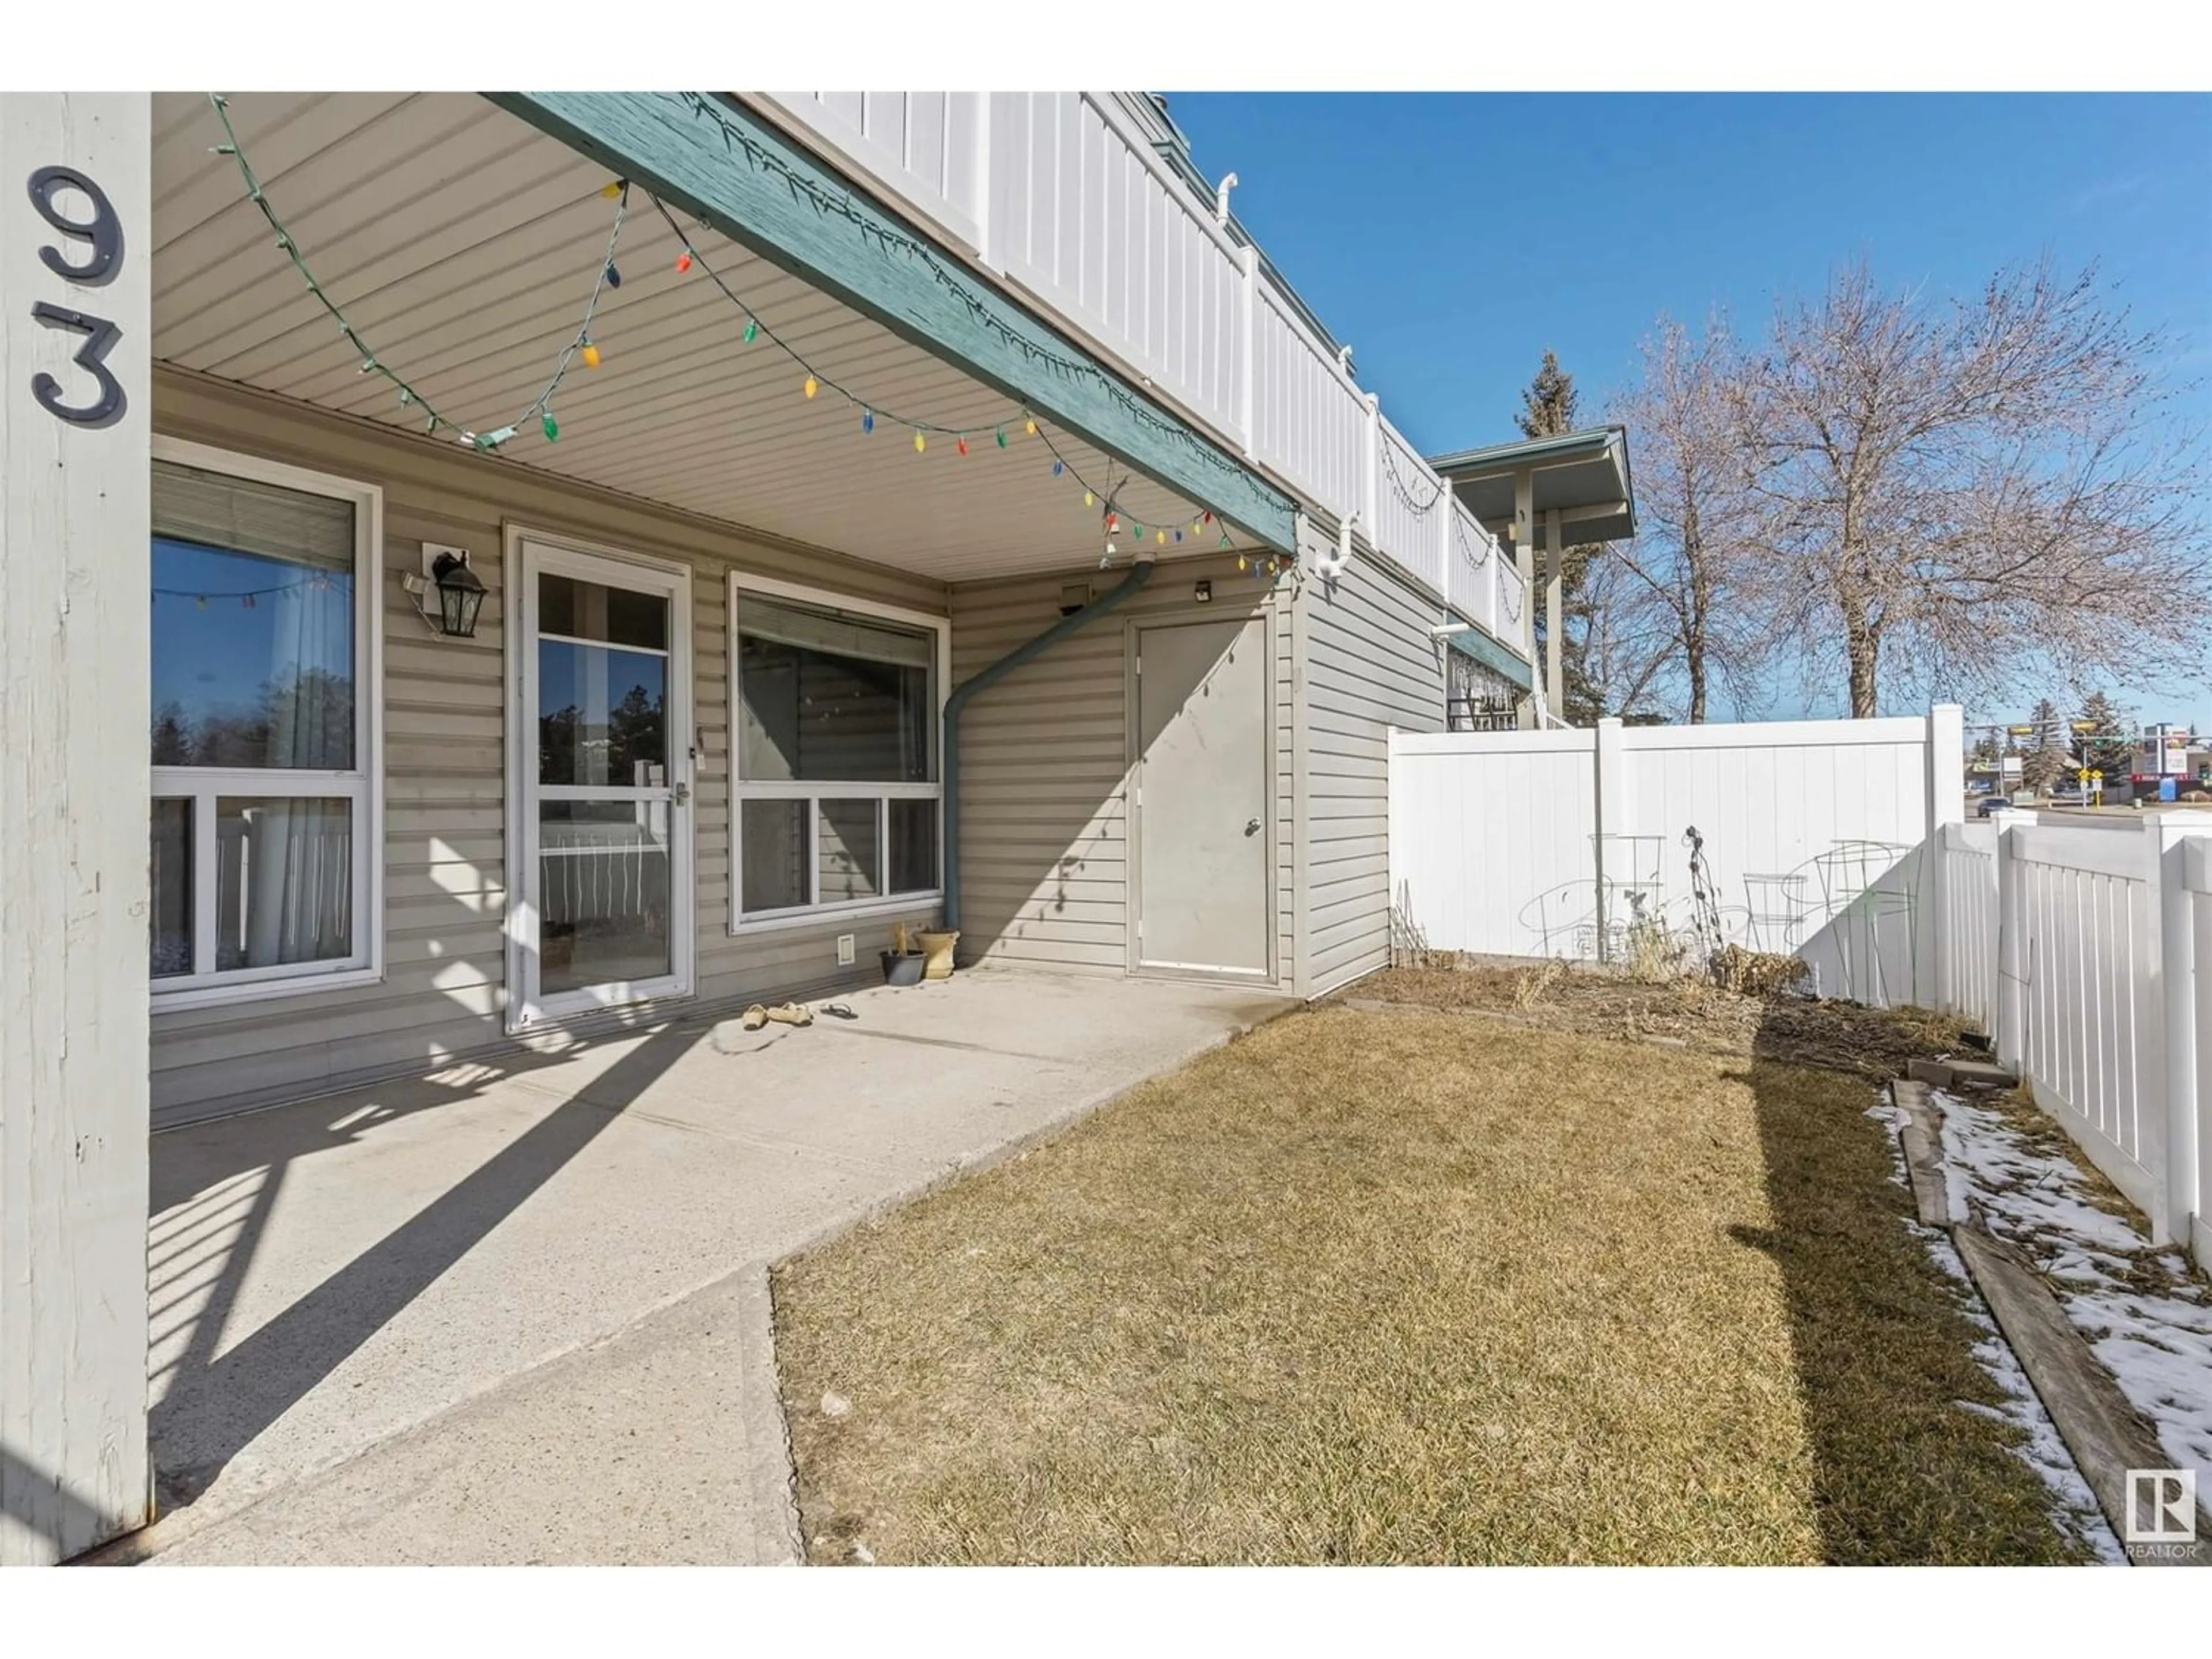 A pic from exterior of the house or condo for #93 2703 79 ST NW, Edmonton Alberta T6K3Z6